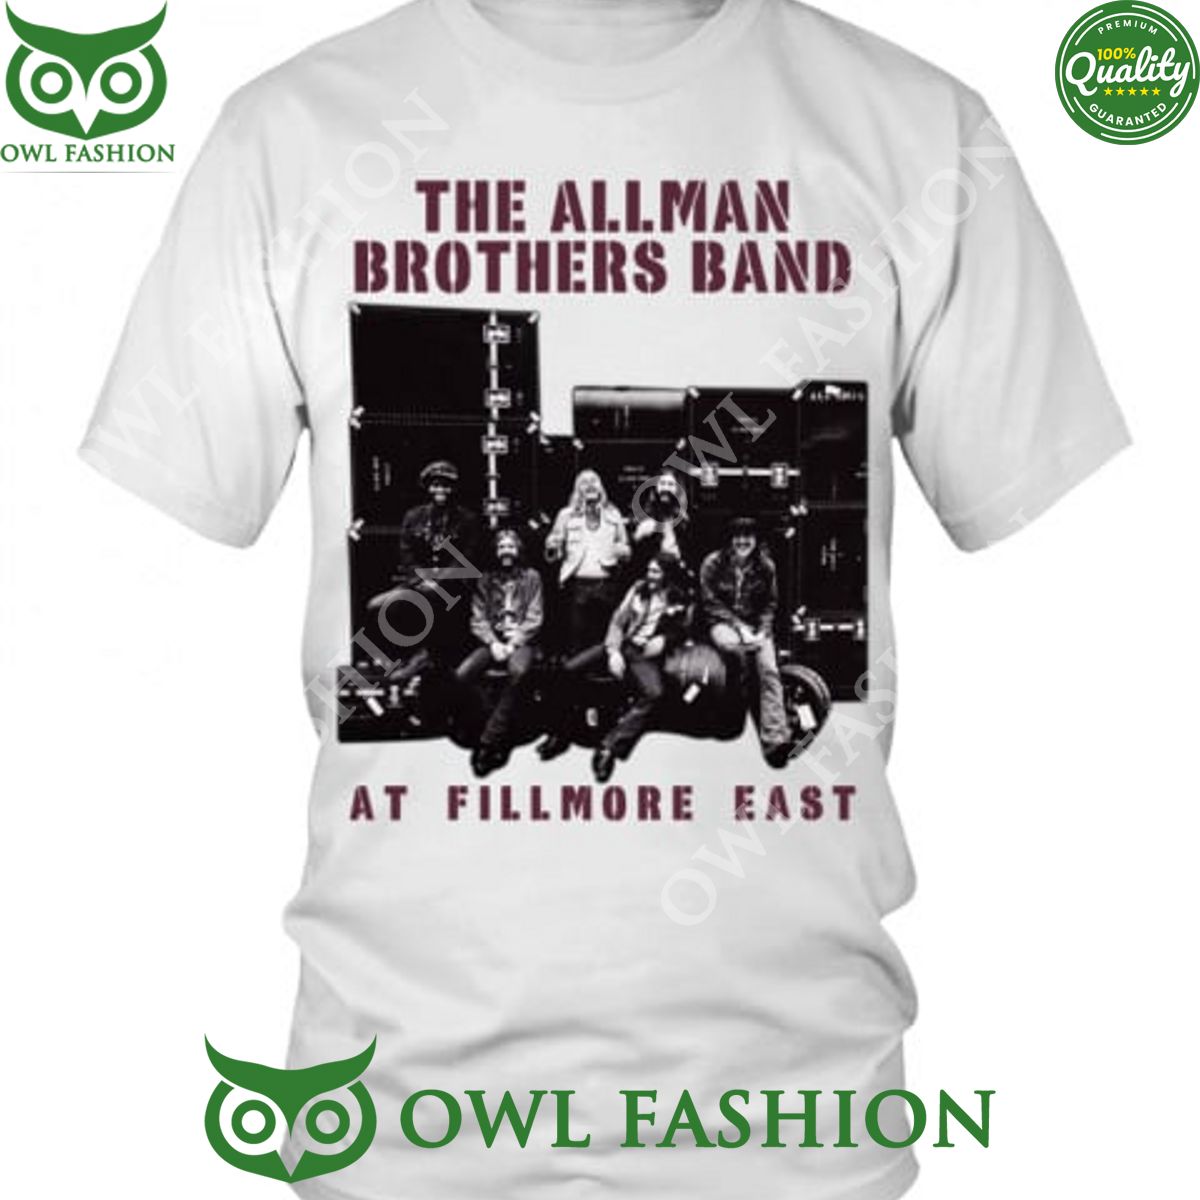 The Allman Brothers Rock Band At fillmore east t shirt